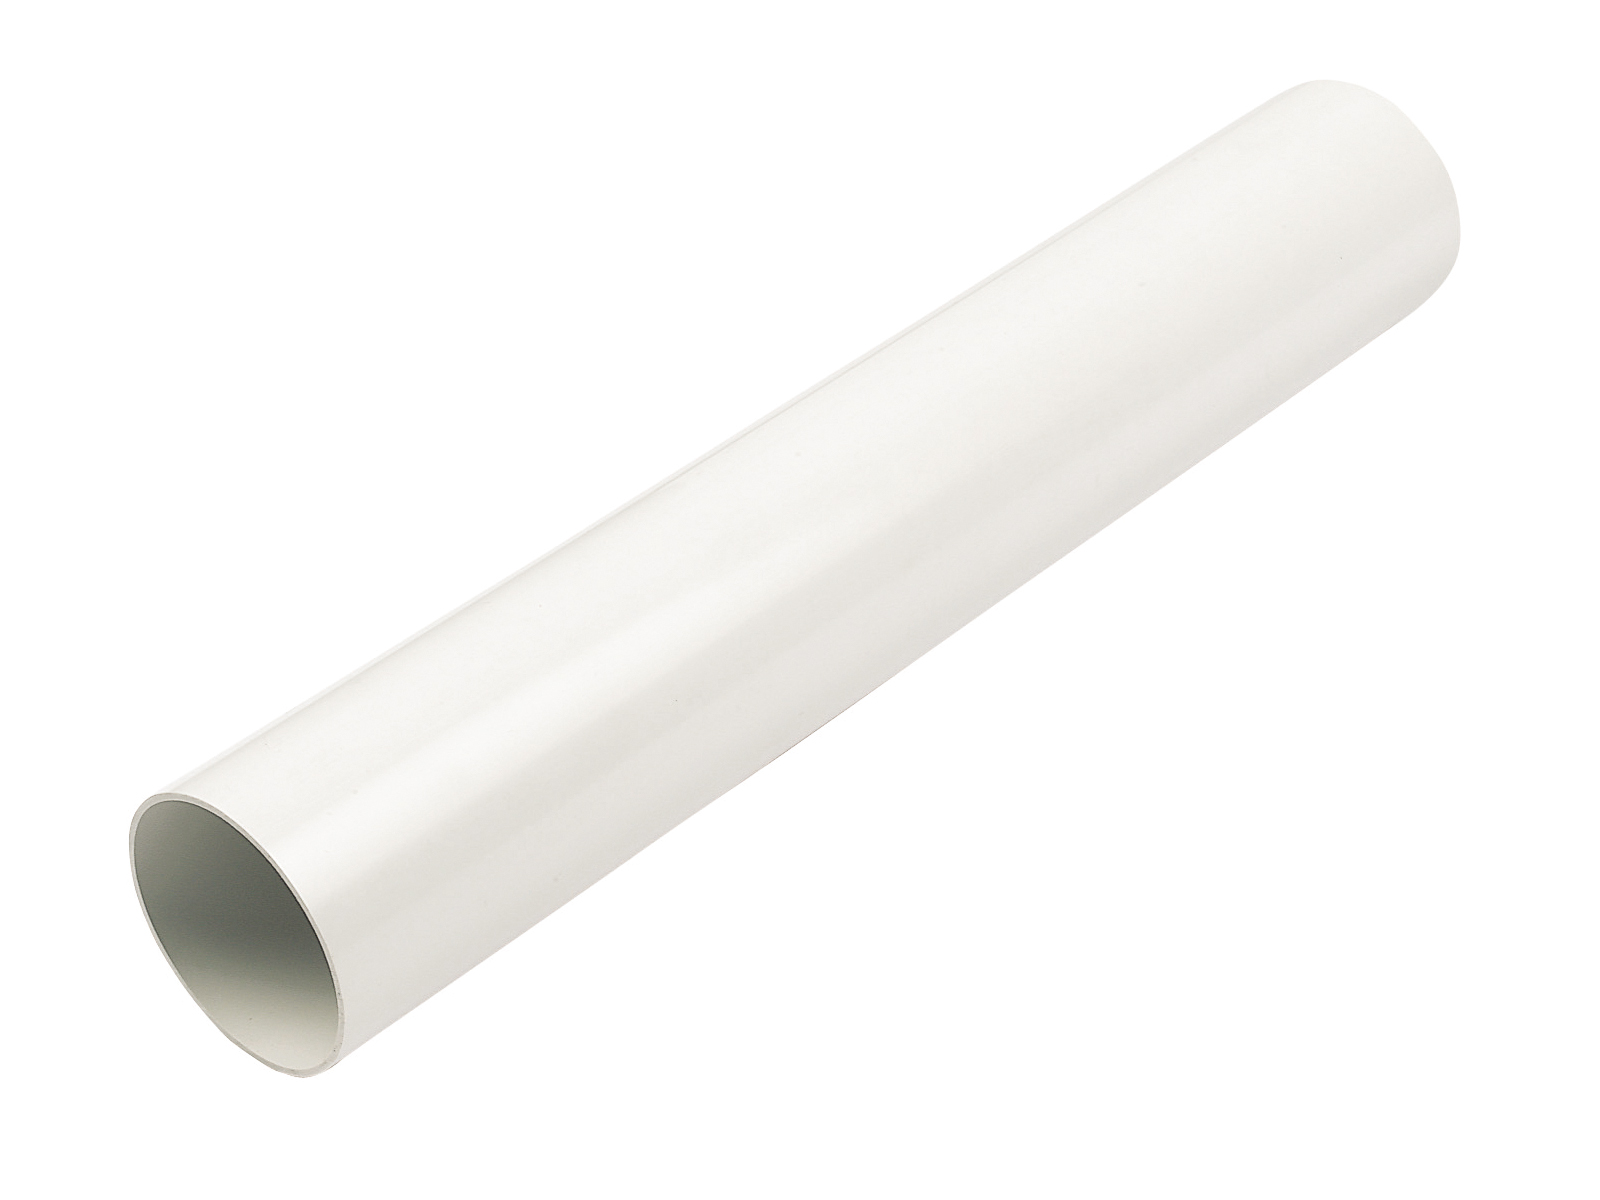 Floplast RP5.5WH 68mm Round Downpipe 5.5 Metre - White